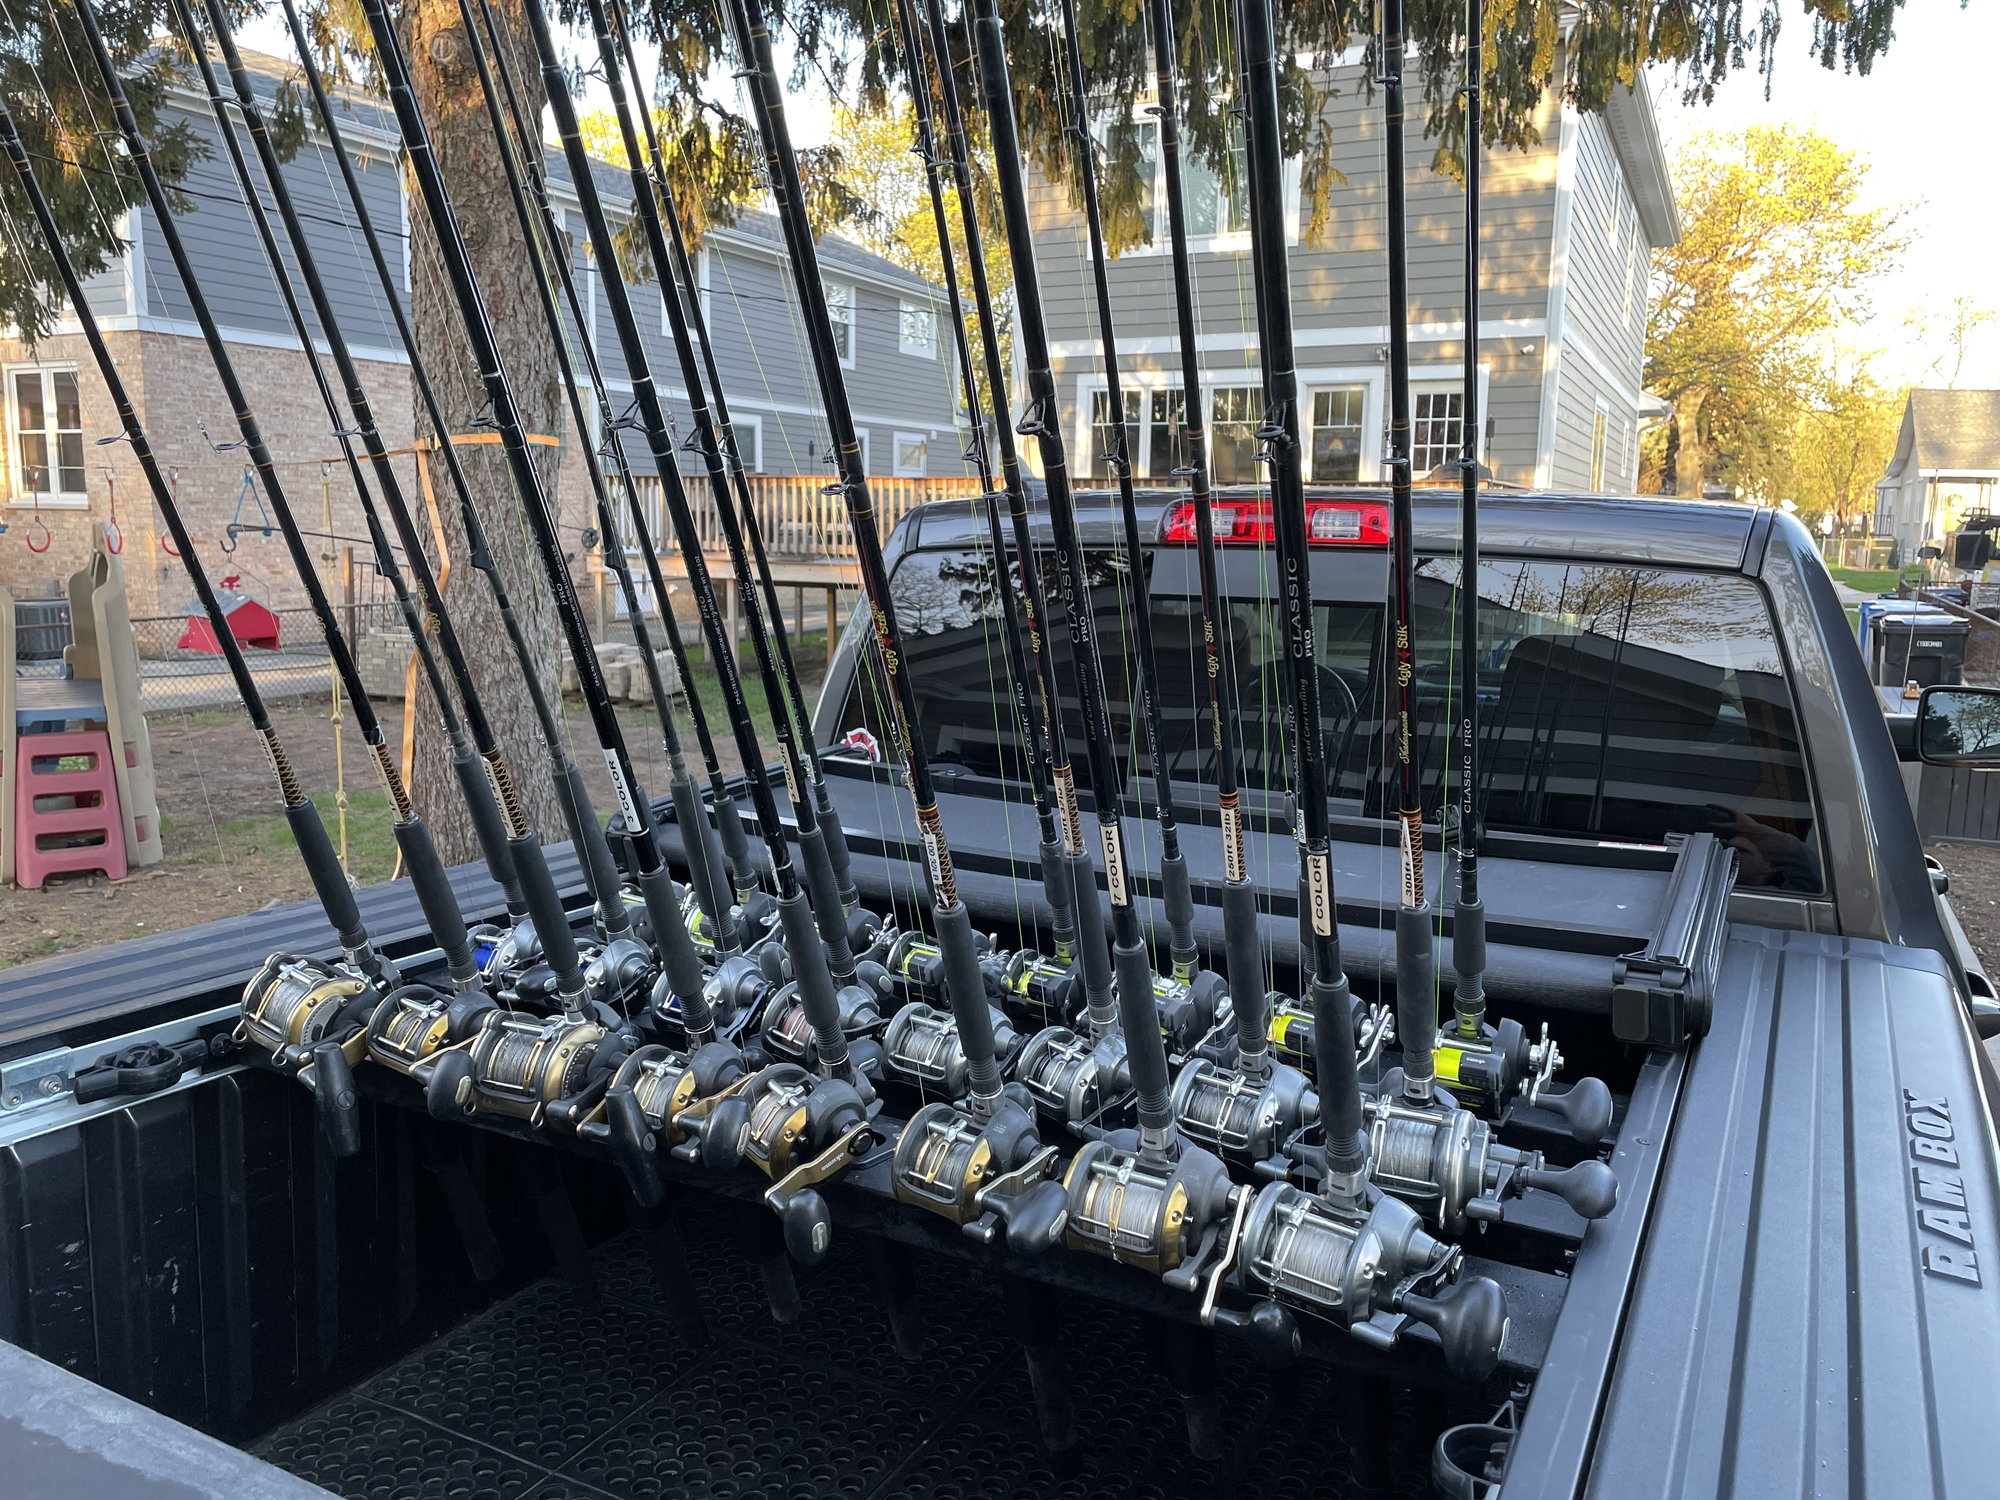 Truck bed rod holder - The Hull Truth - Boating and Fishing Forum